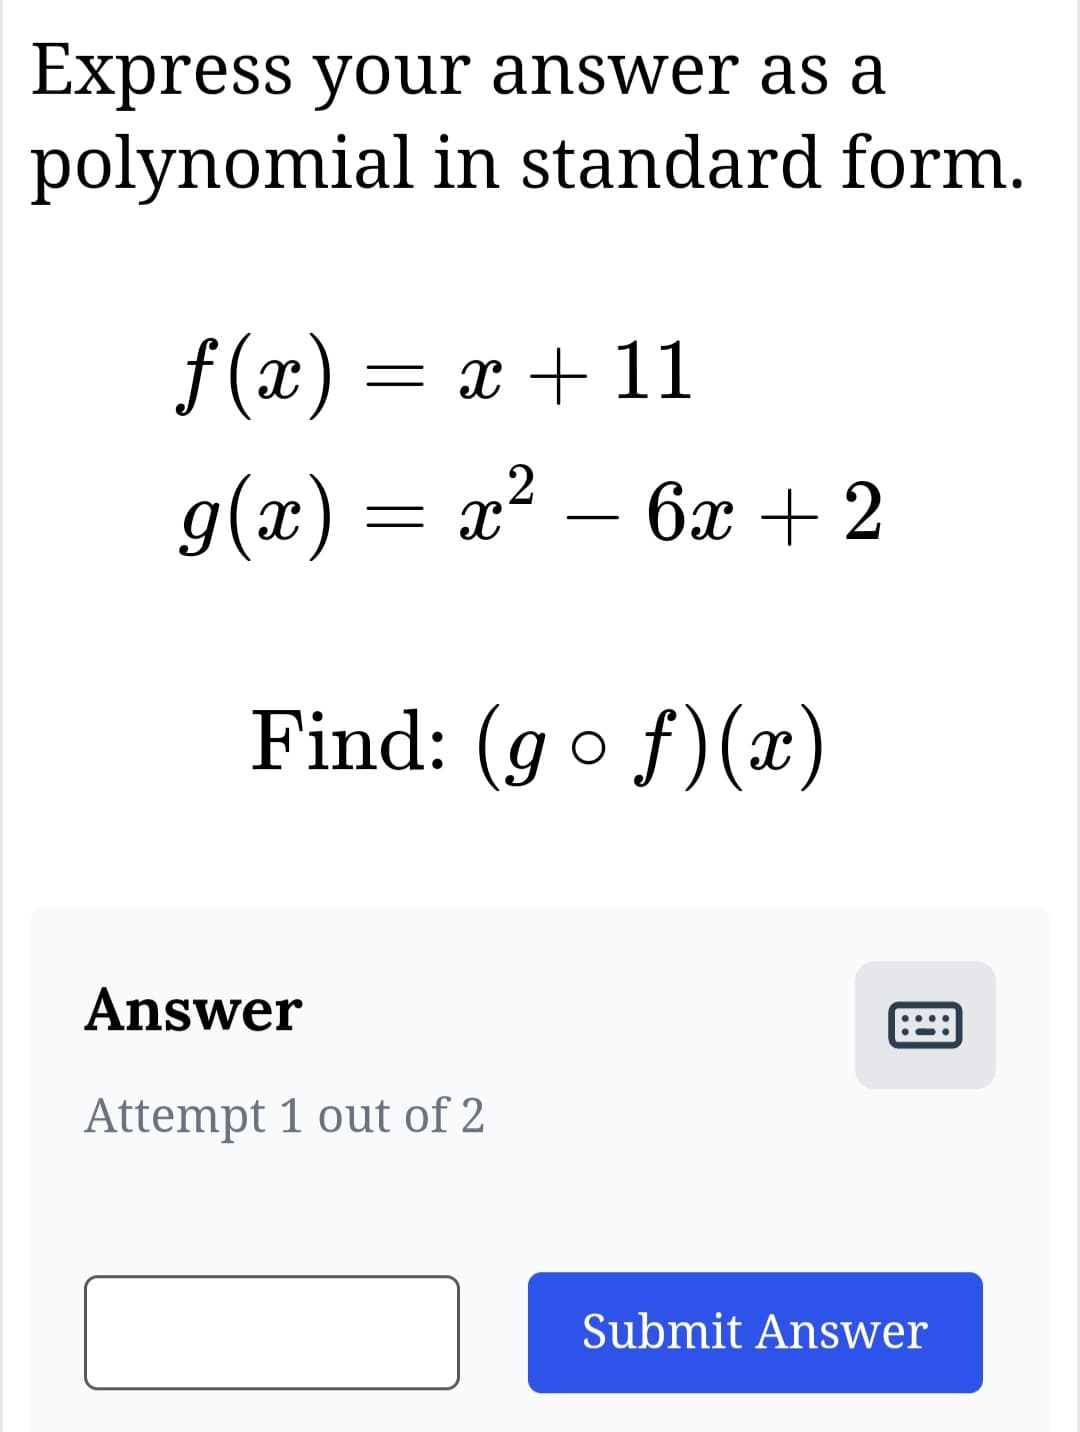 Express your answer as a
polynomial in standard form.
x +11
x² - 6x + 2
2
f(x)=
g(x) = x
Find: (gof)(x)
Answer
Attempt 1 out of 2
团
Submit Answer